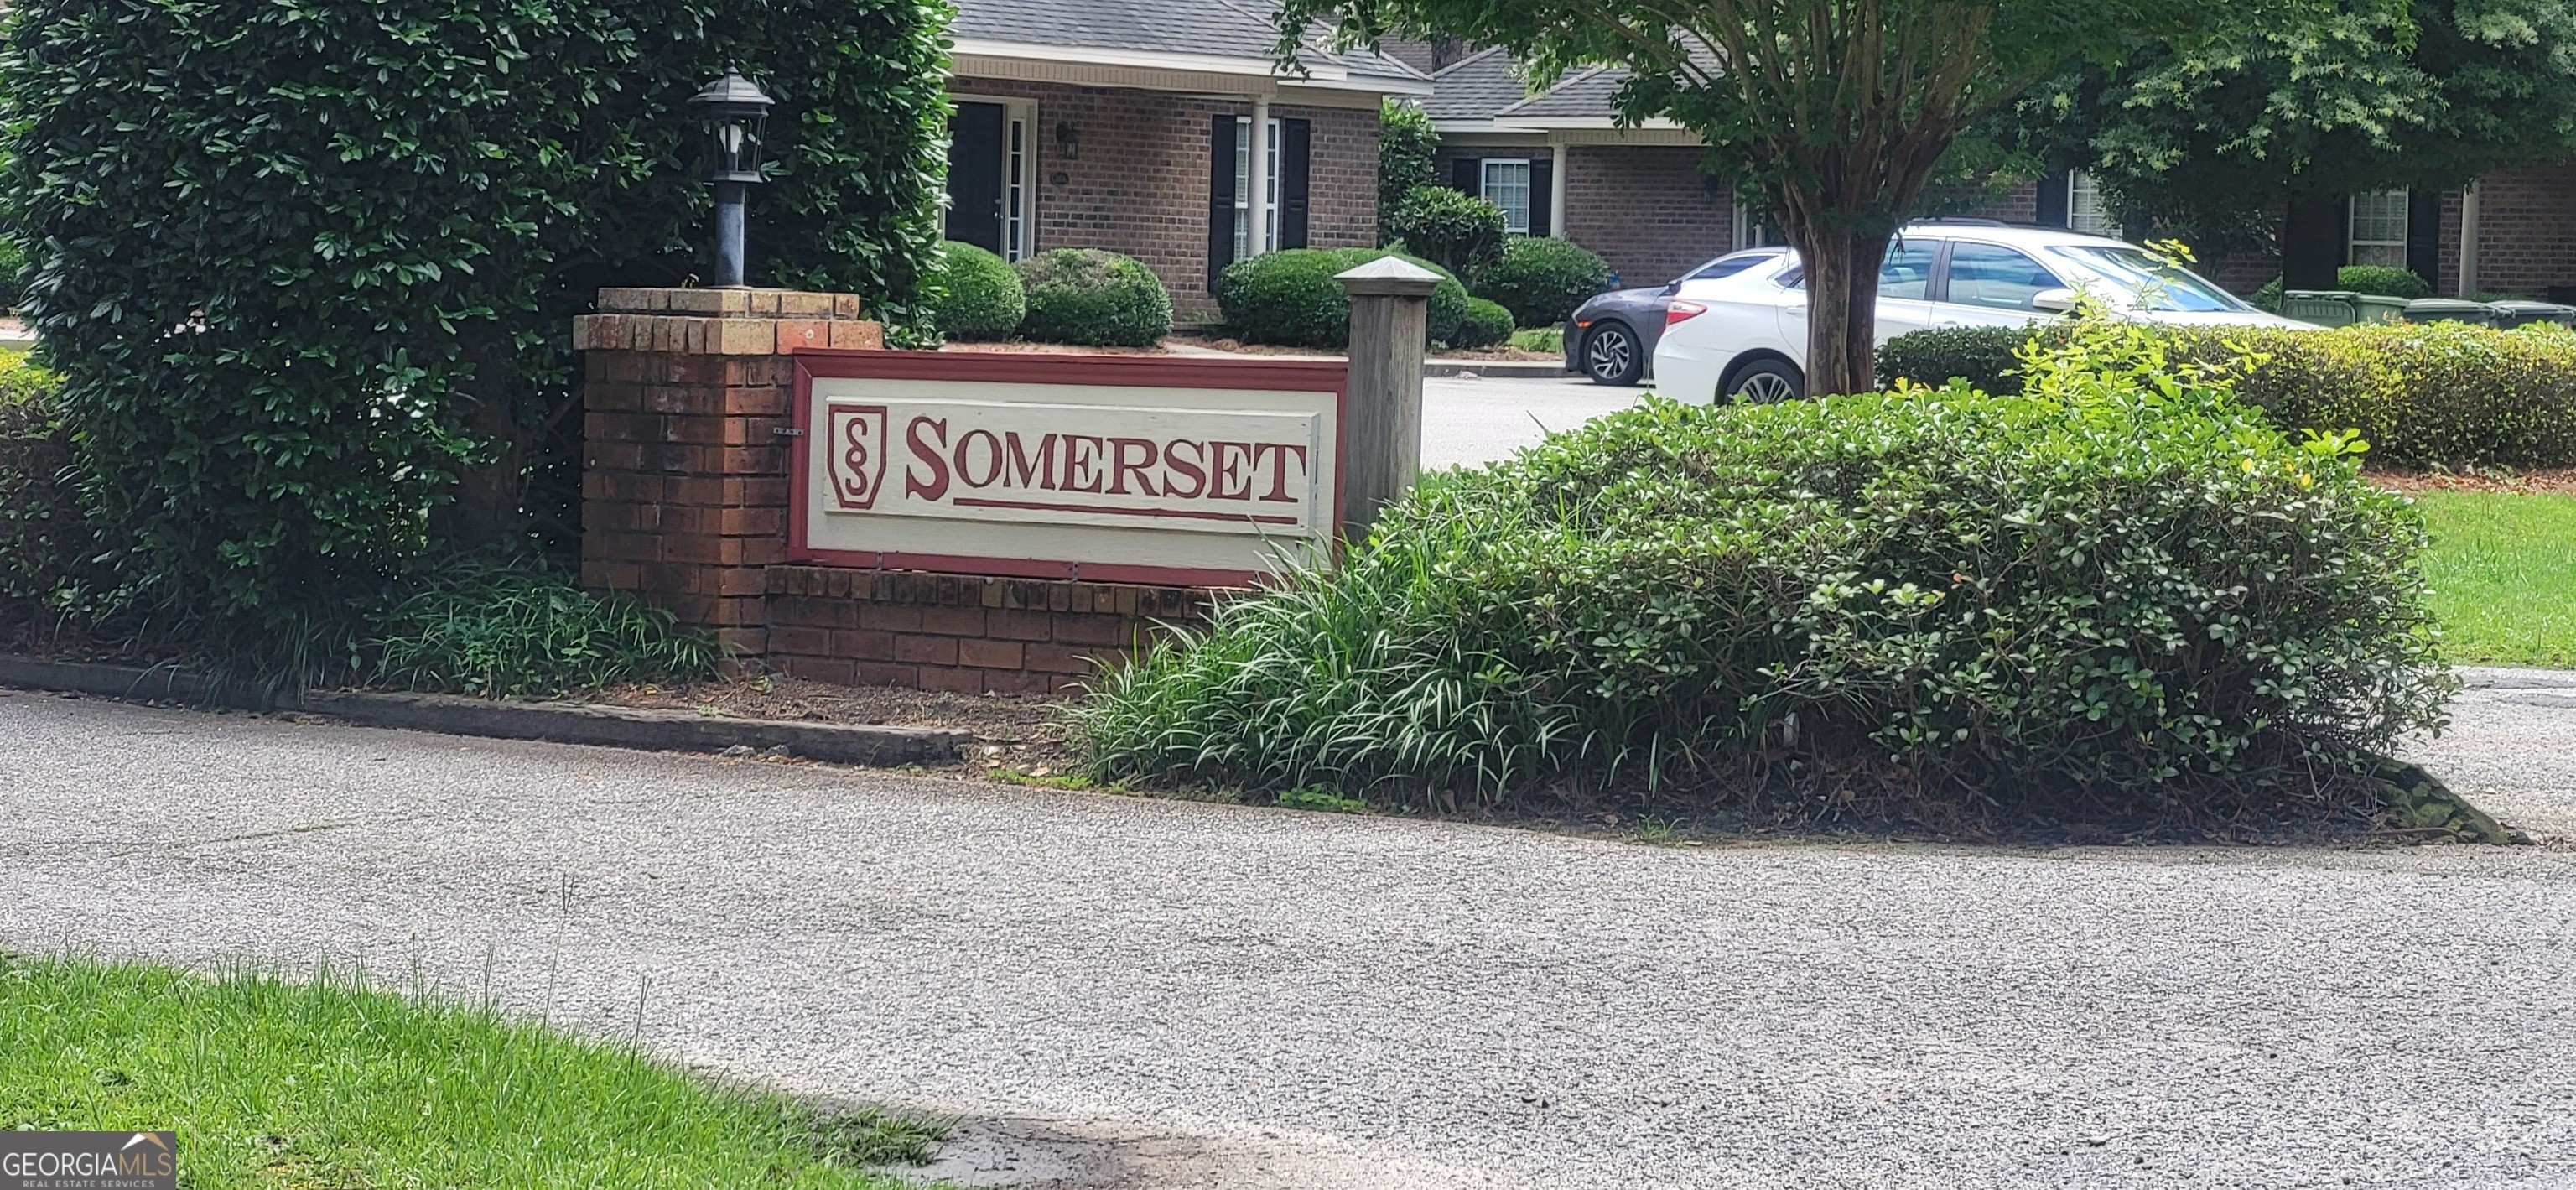 1. 23 Somerset Townhouses